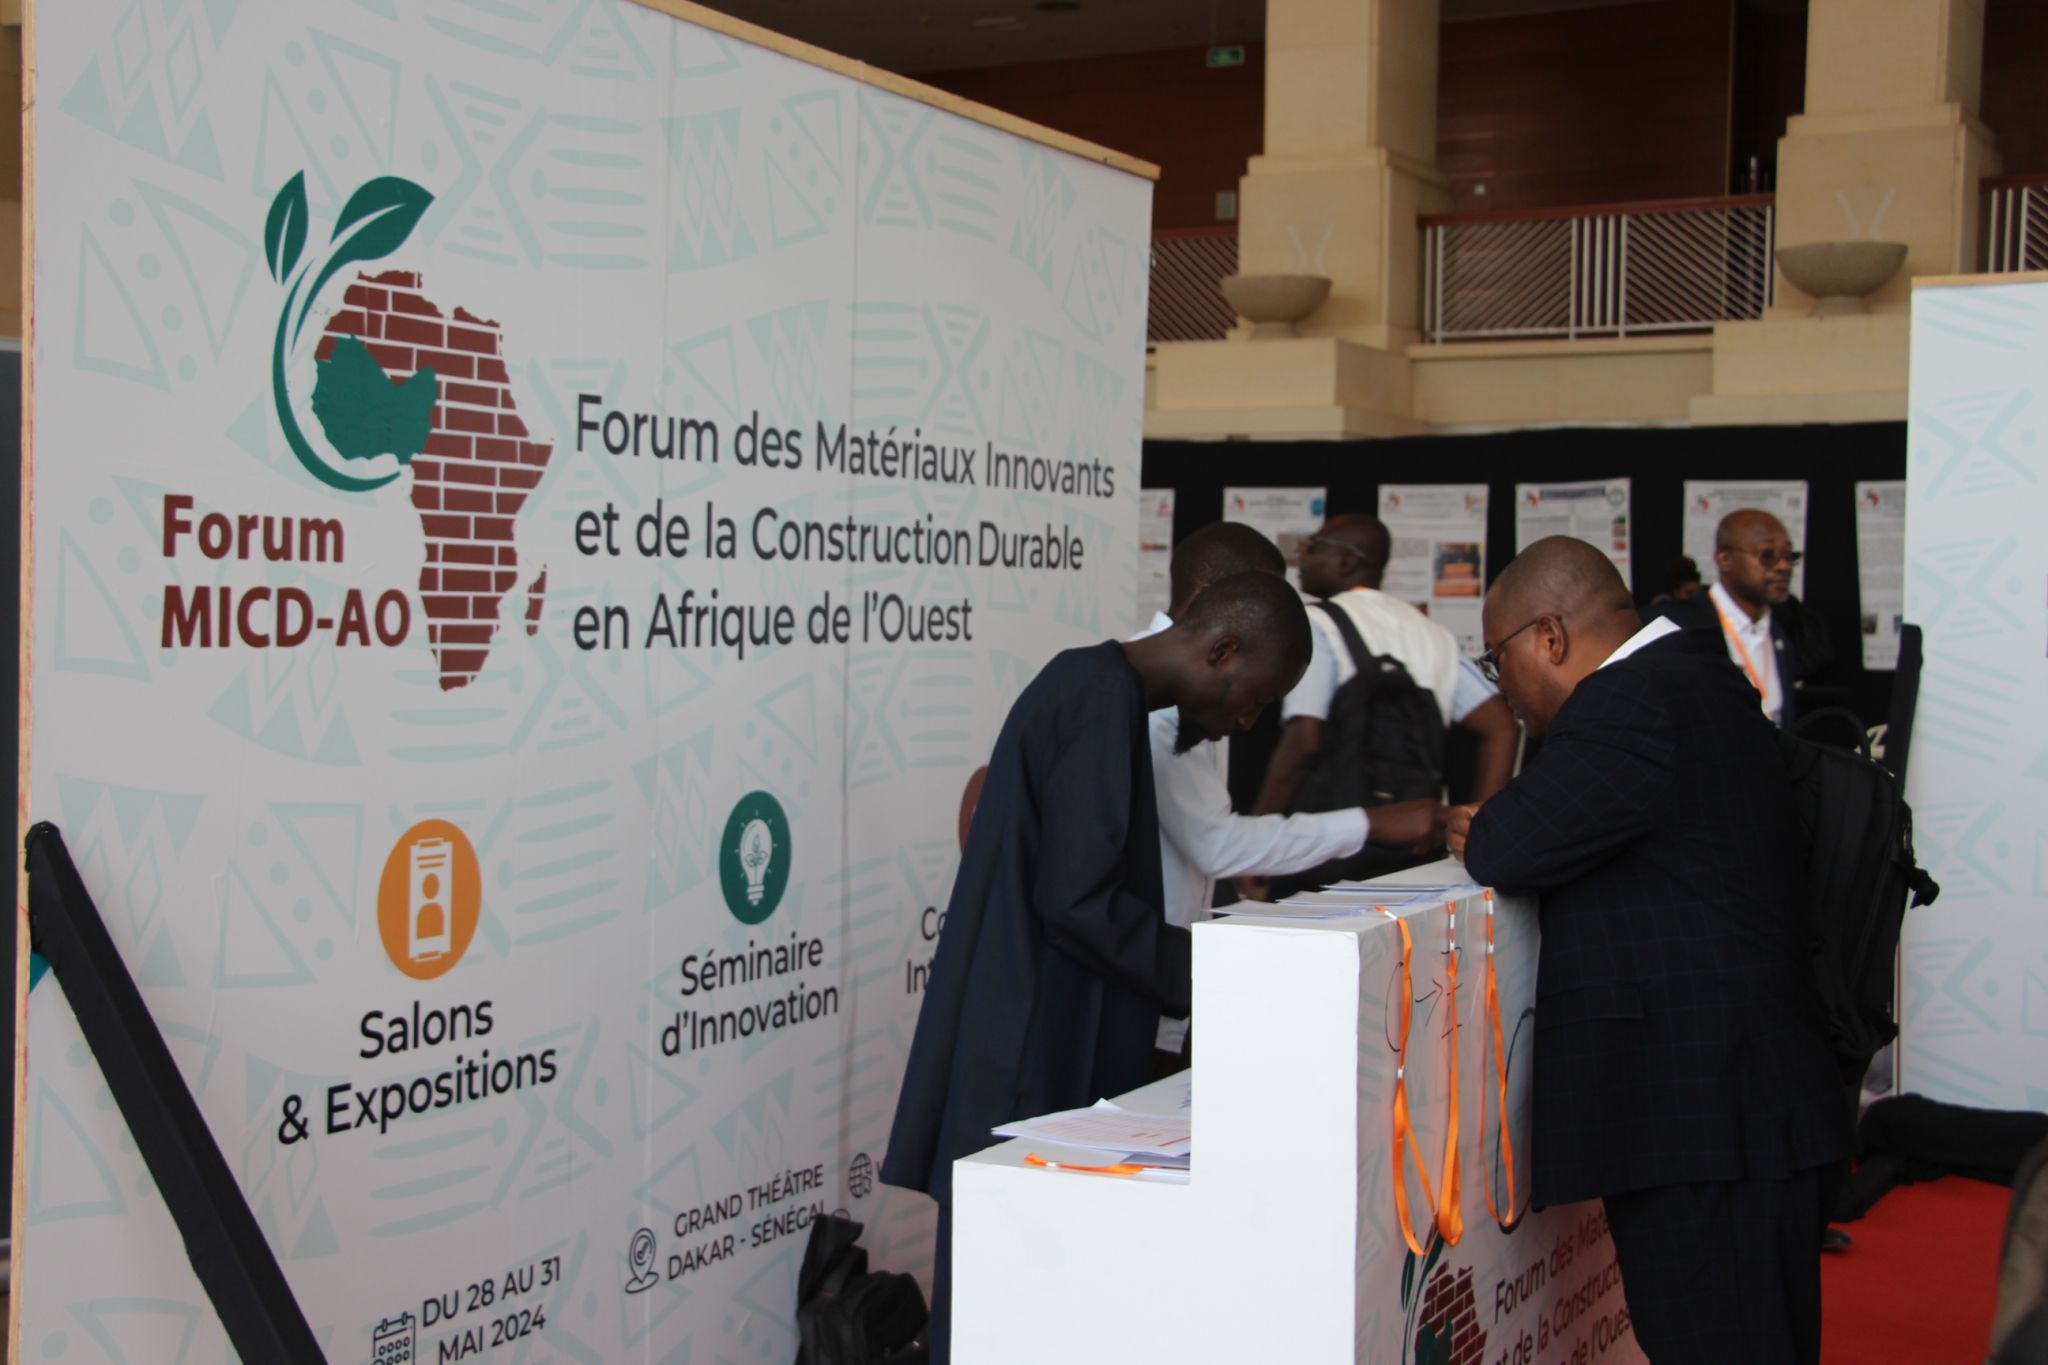 Forum MICD-AO: Innovative Materials and Sustainable Construction in West Africa